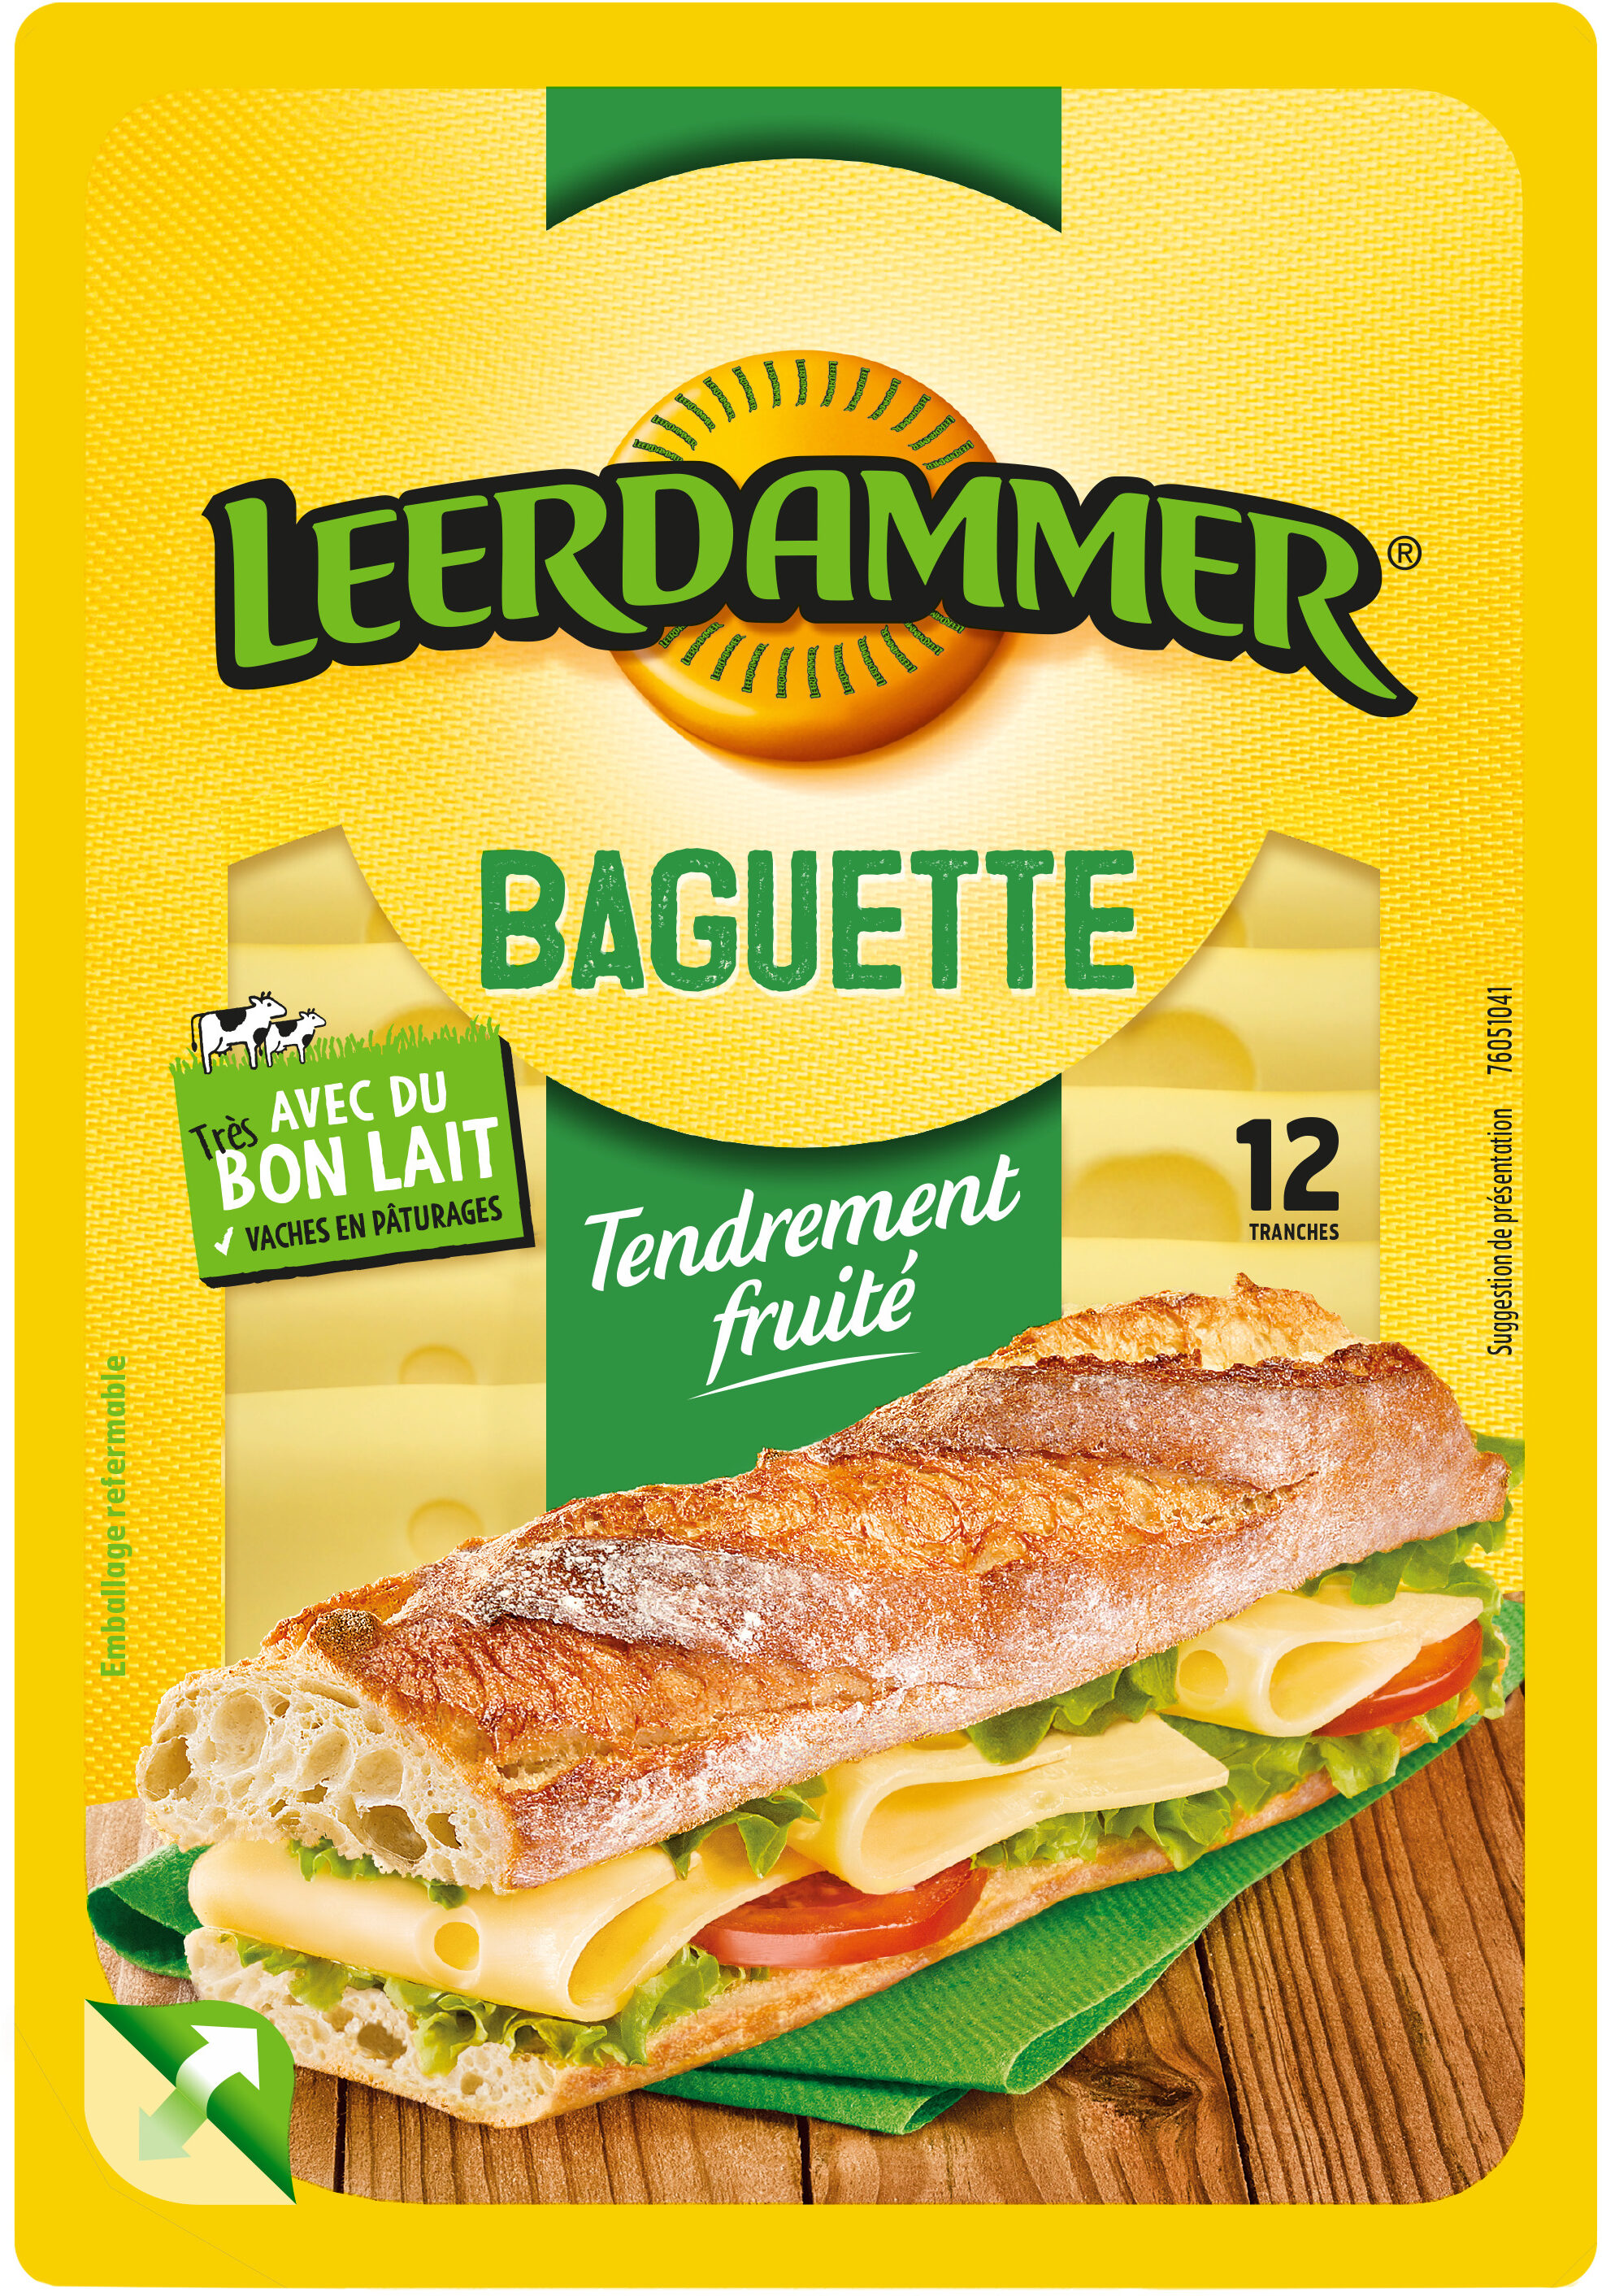 Leerdammer special baguette 12 tranches 160g - Product - fr